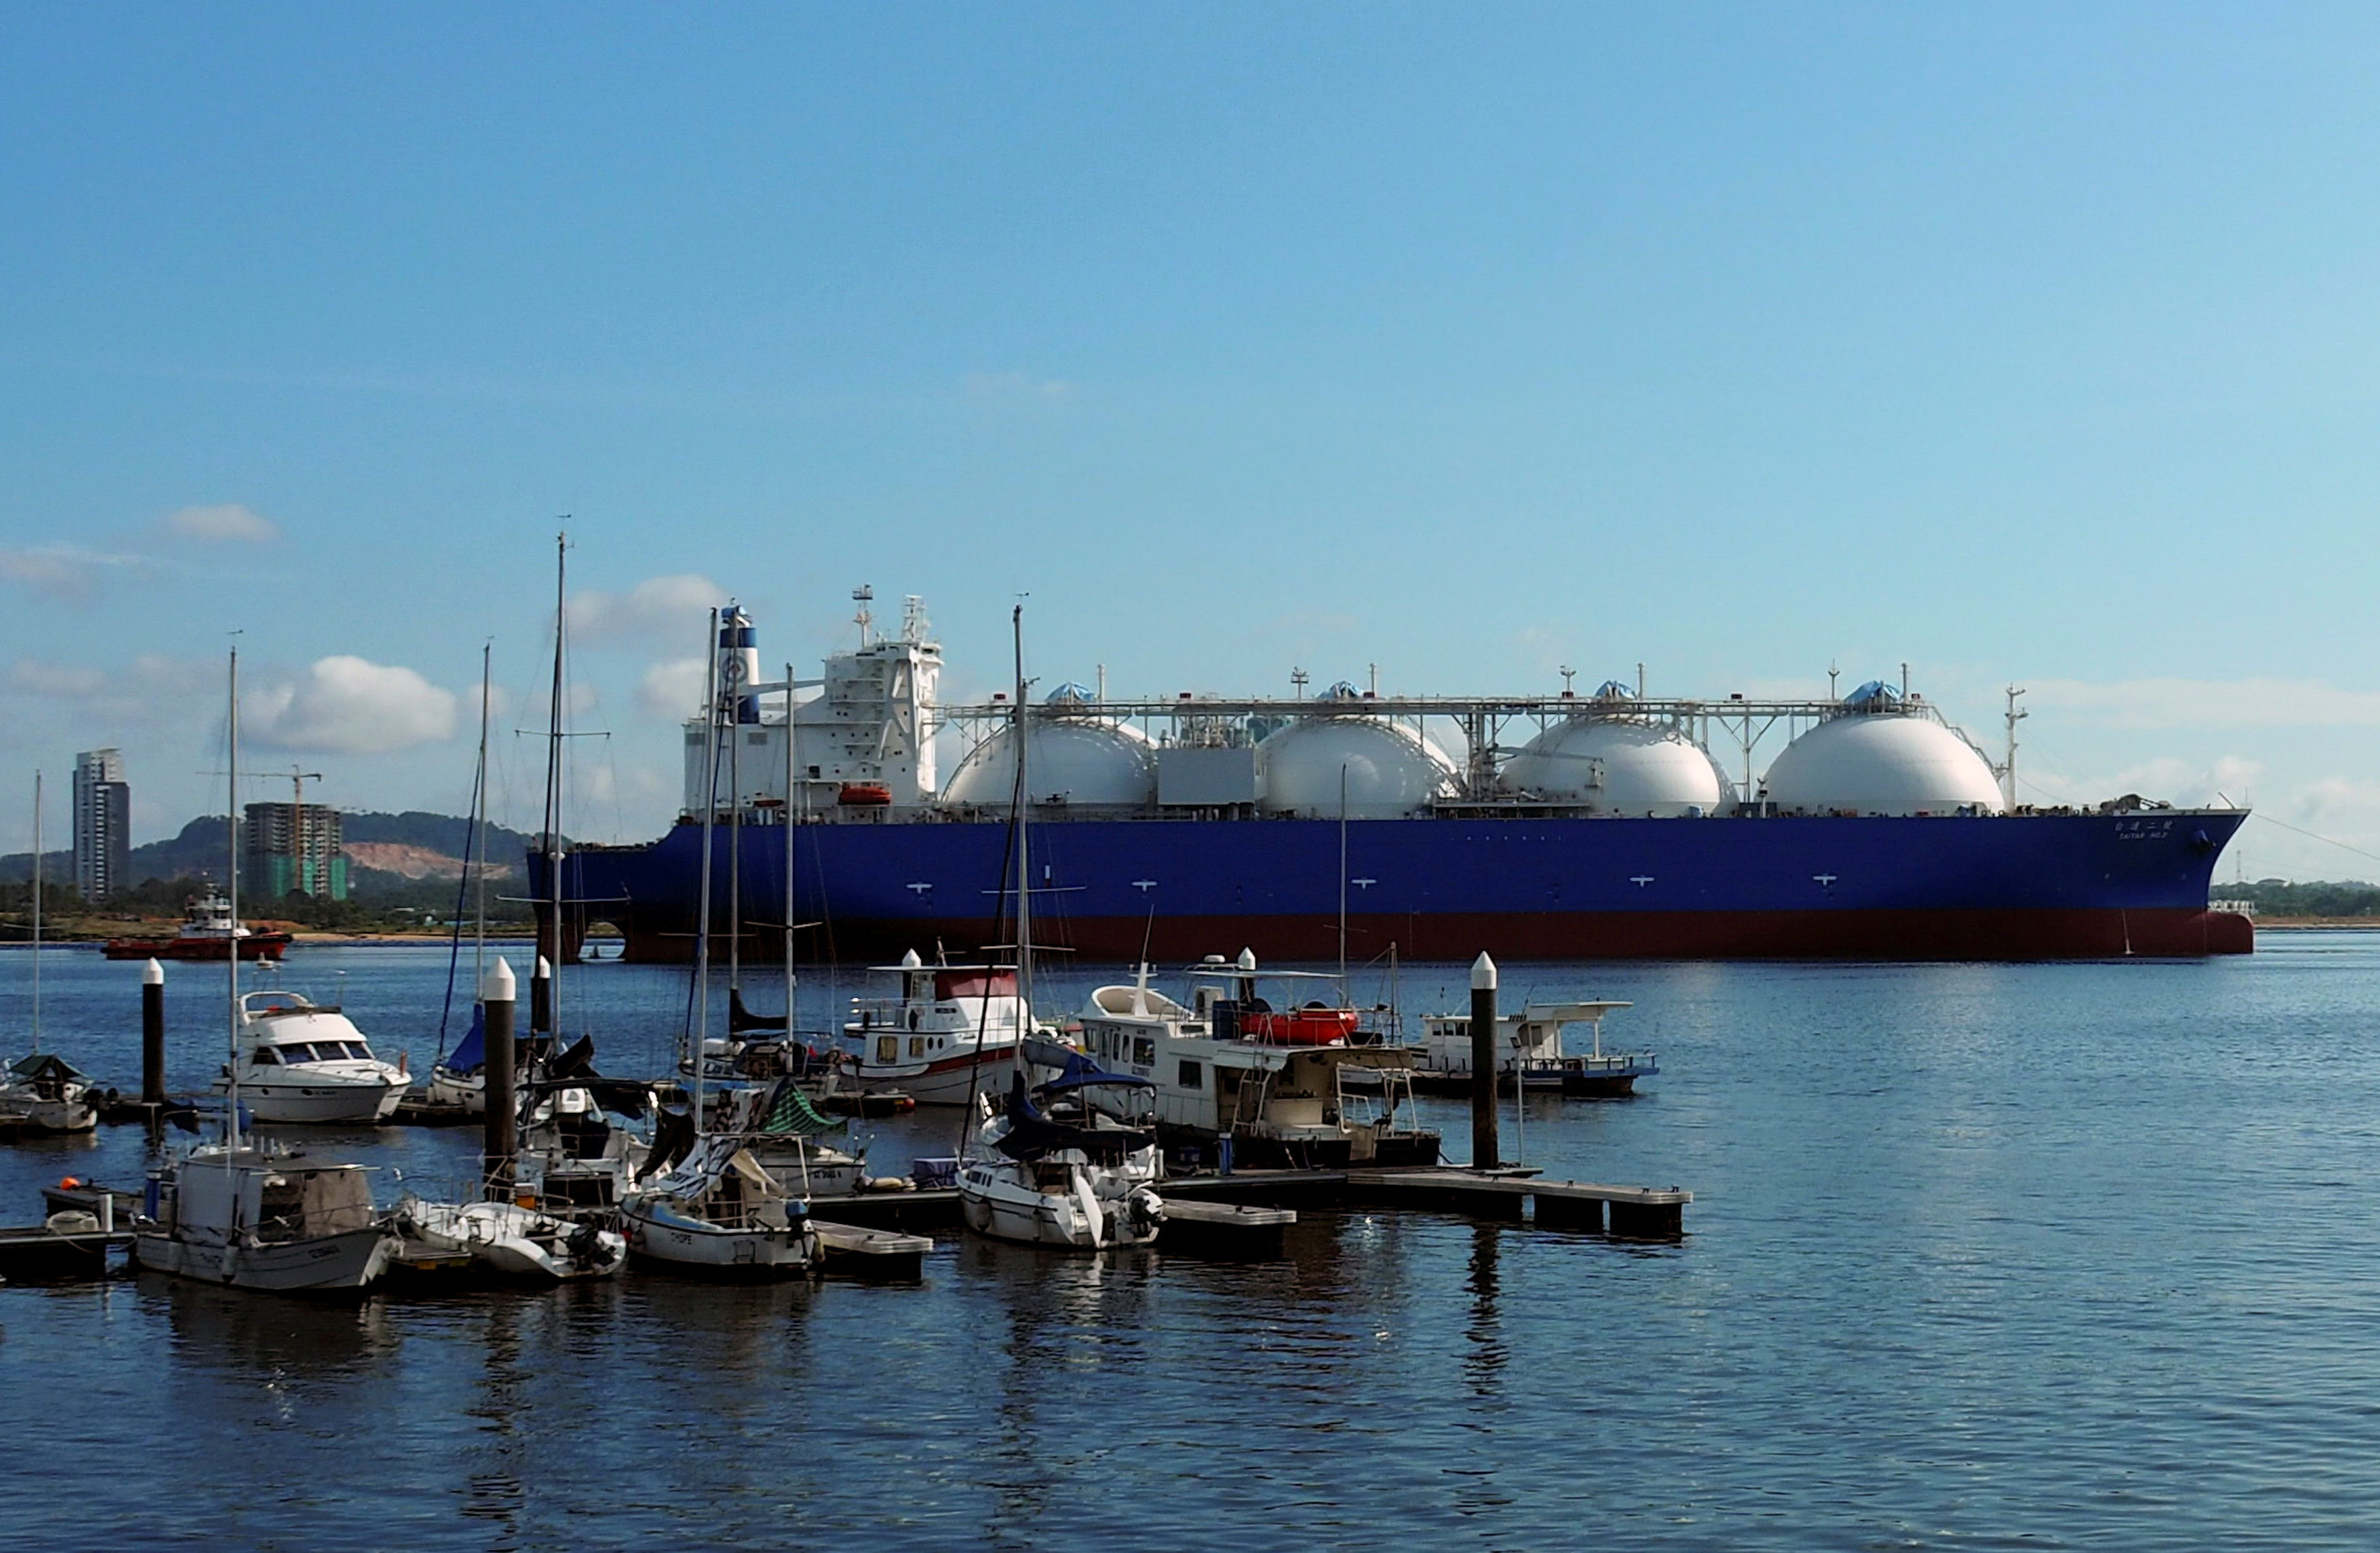 LNG prices for November soften after earlier strong weeks